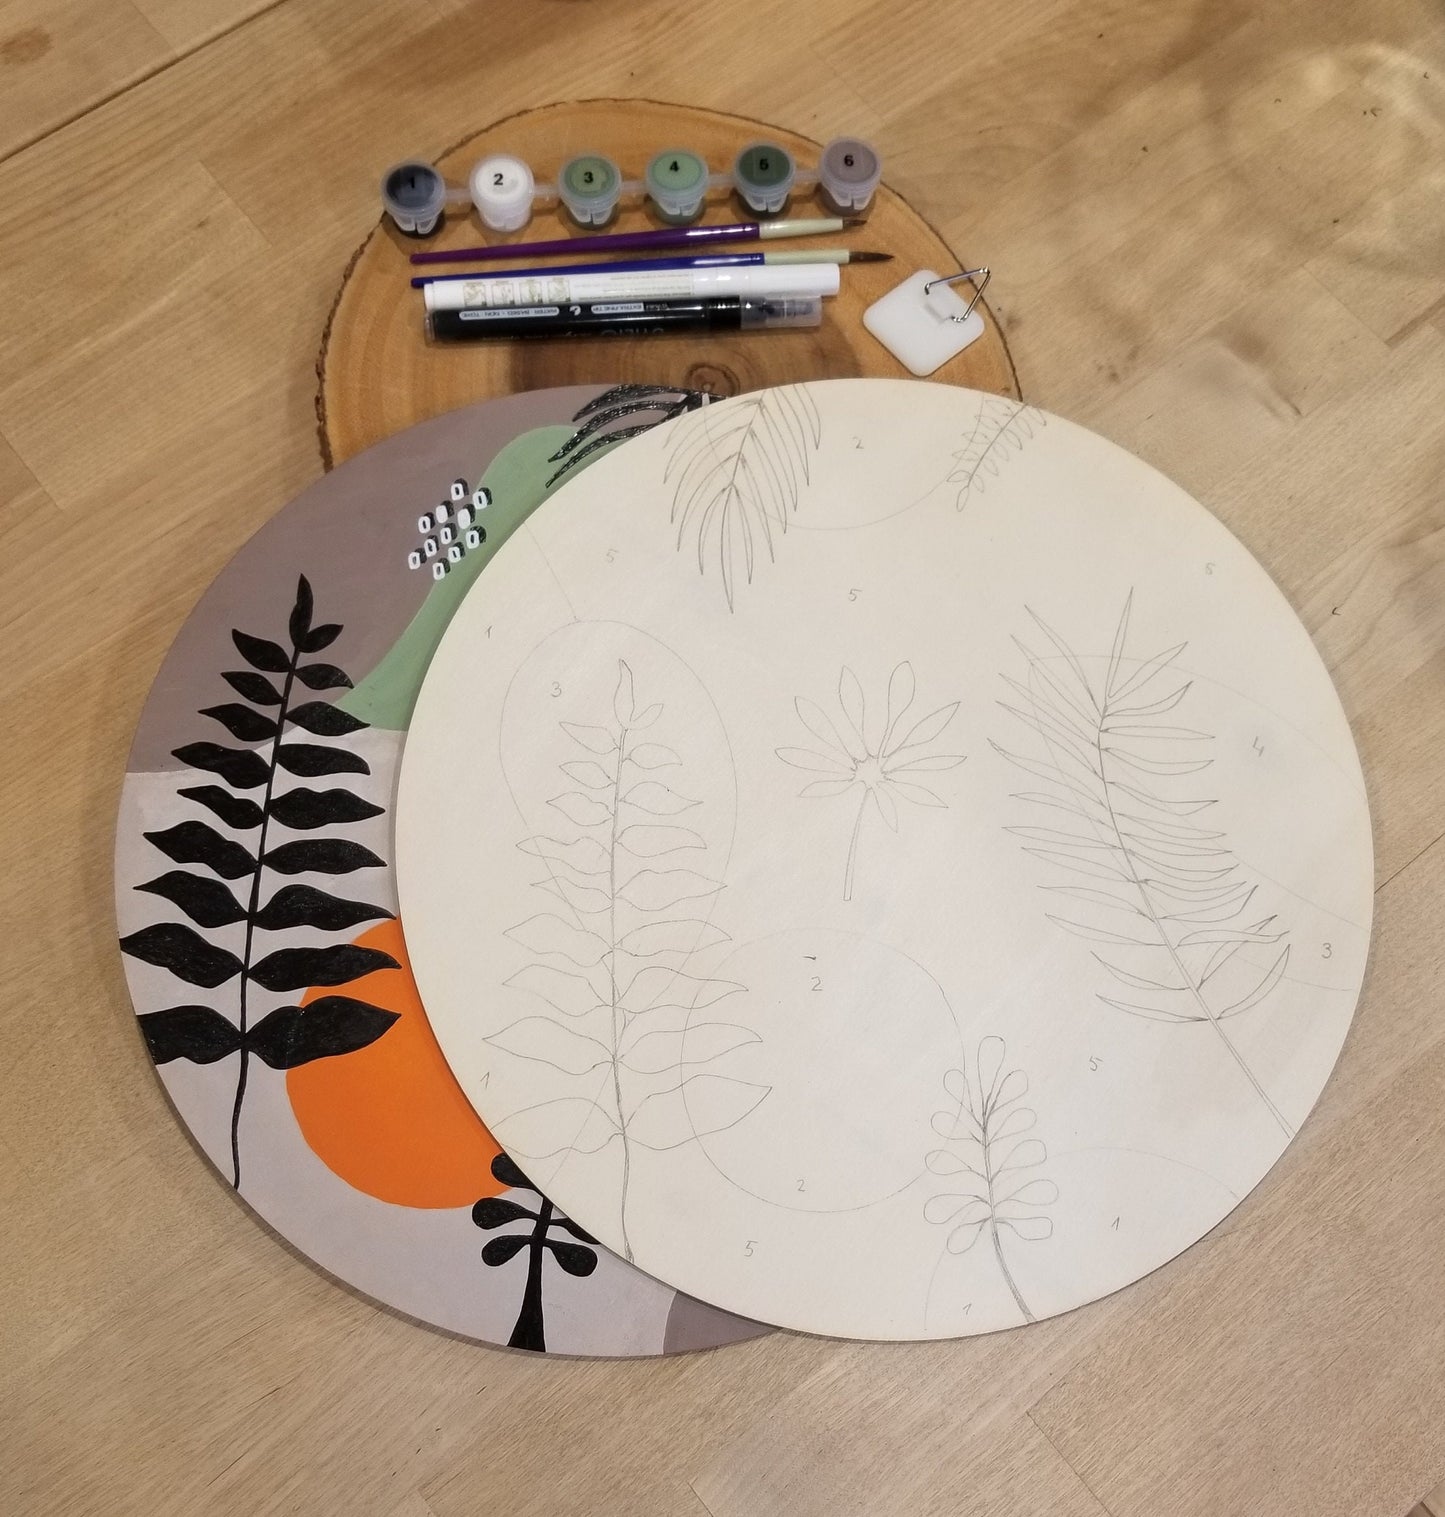 Craft night party, DIY nature painting, Paint and sip kit, DIY paint by numbers